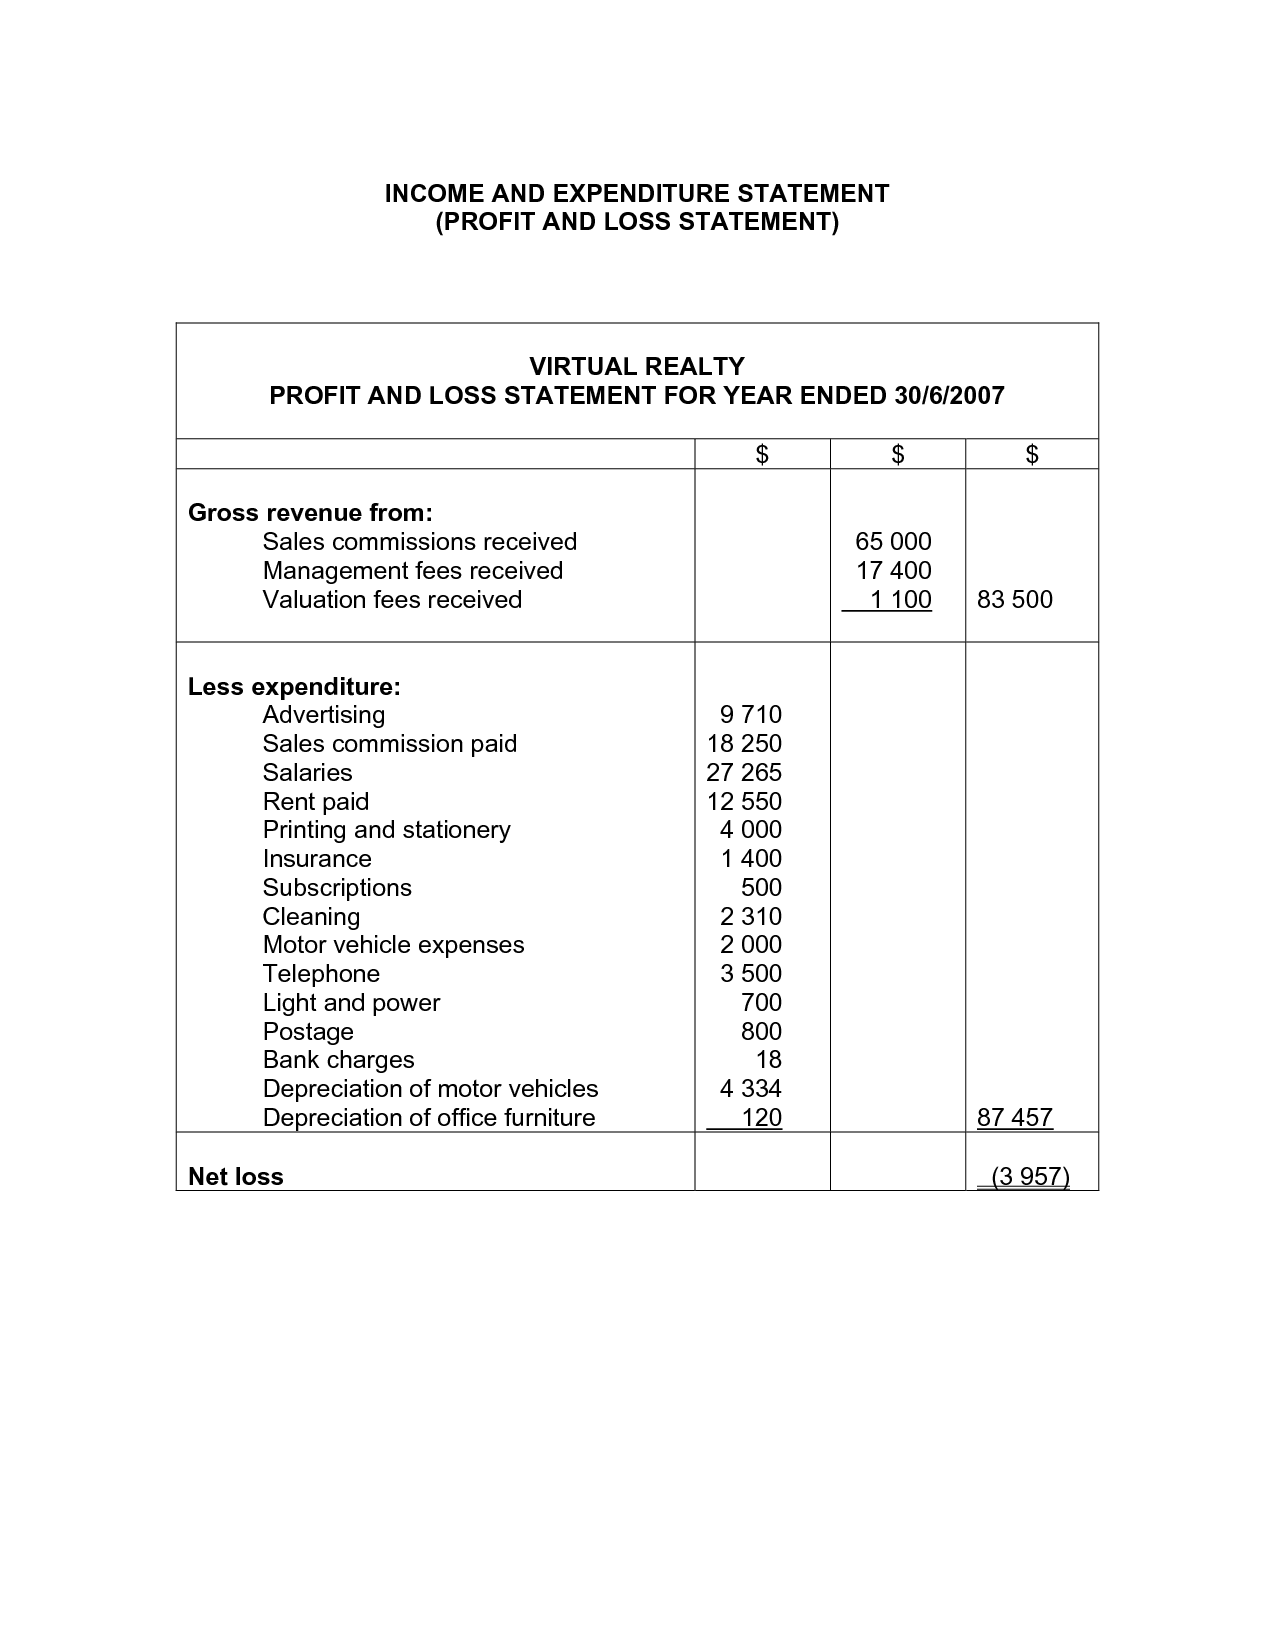 Income and Expenditure Statement Image